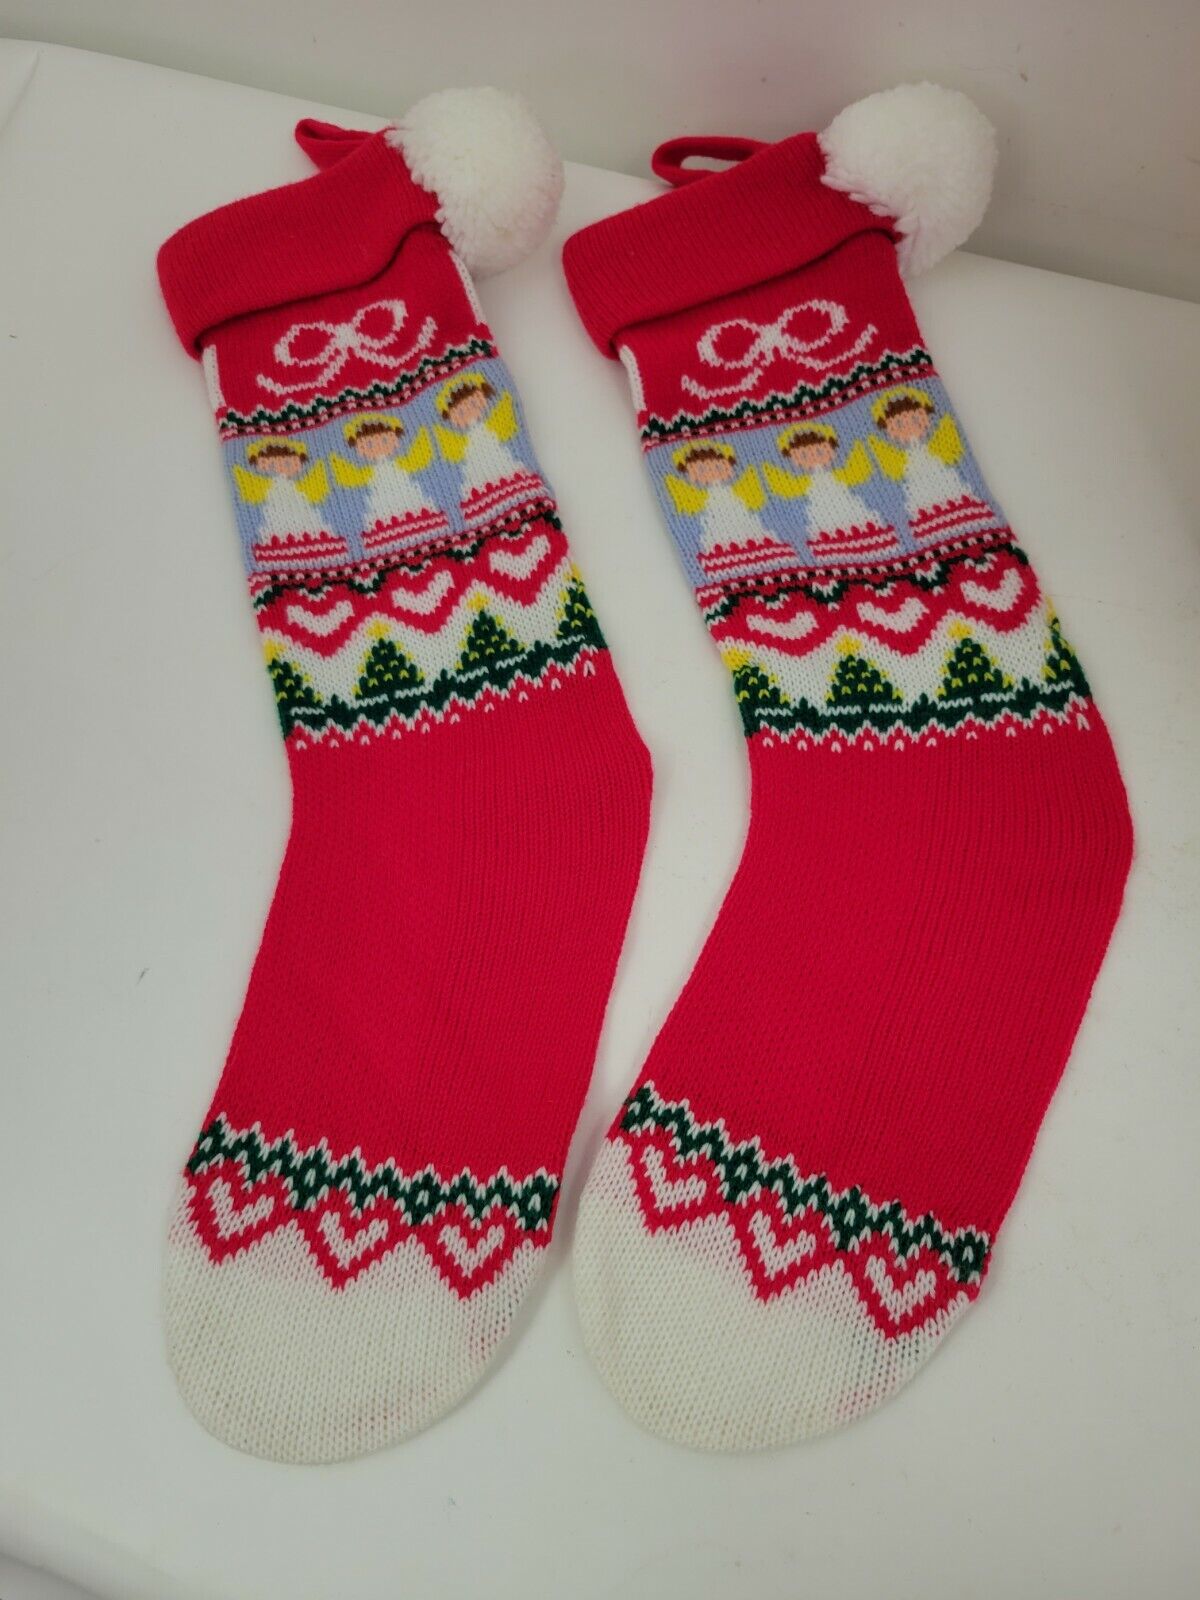 2 Vintage 1983 Hallmark Knit Christmas Stockings Red  Angels Green Hearts pompom